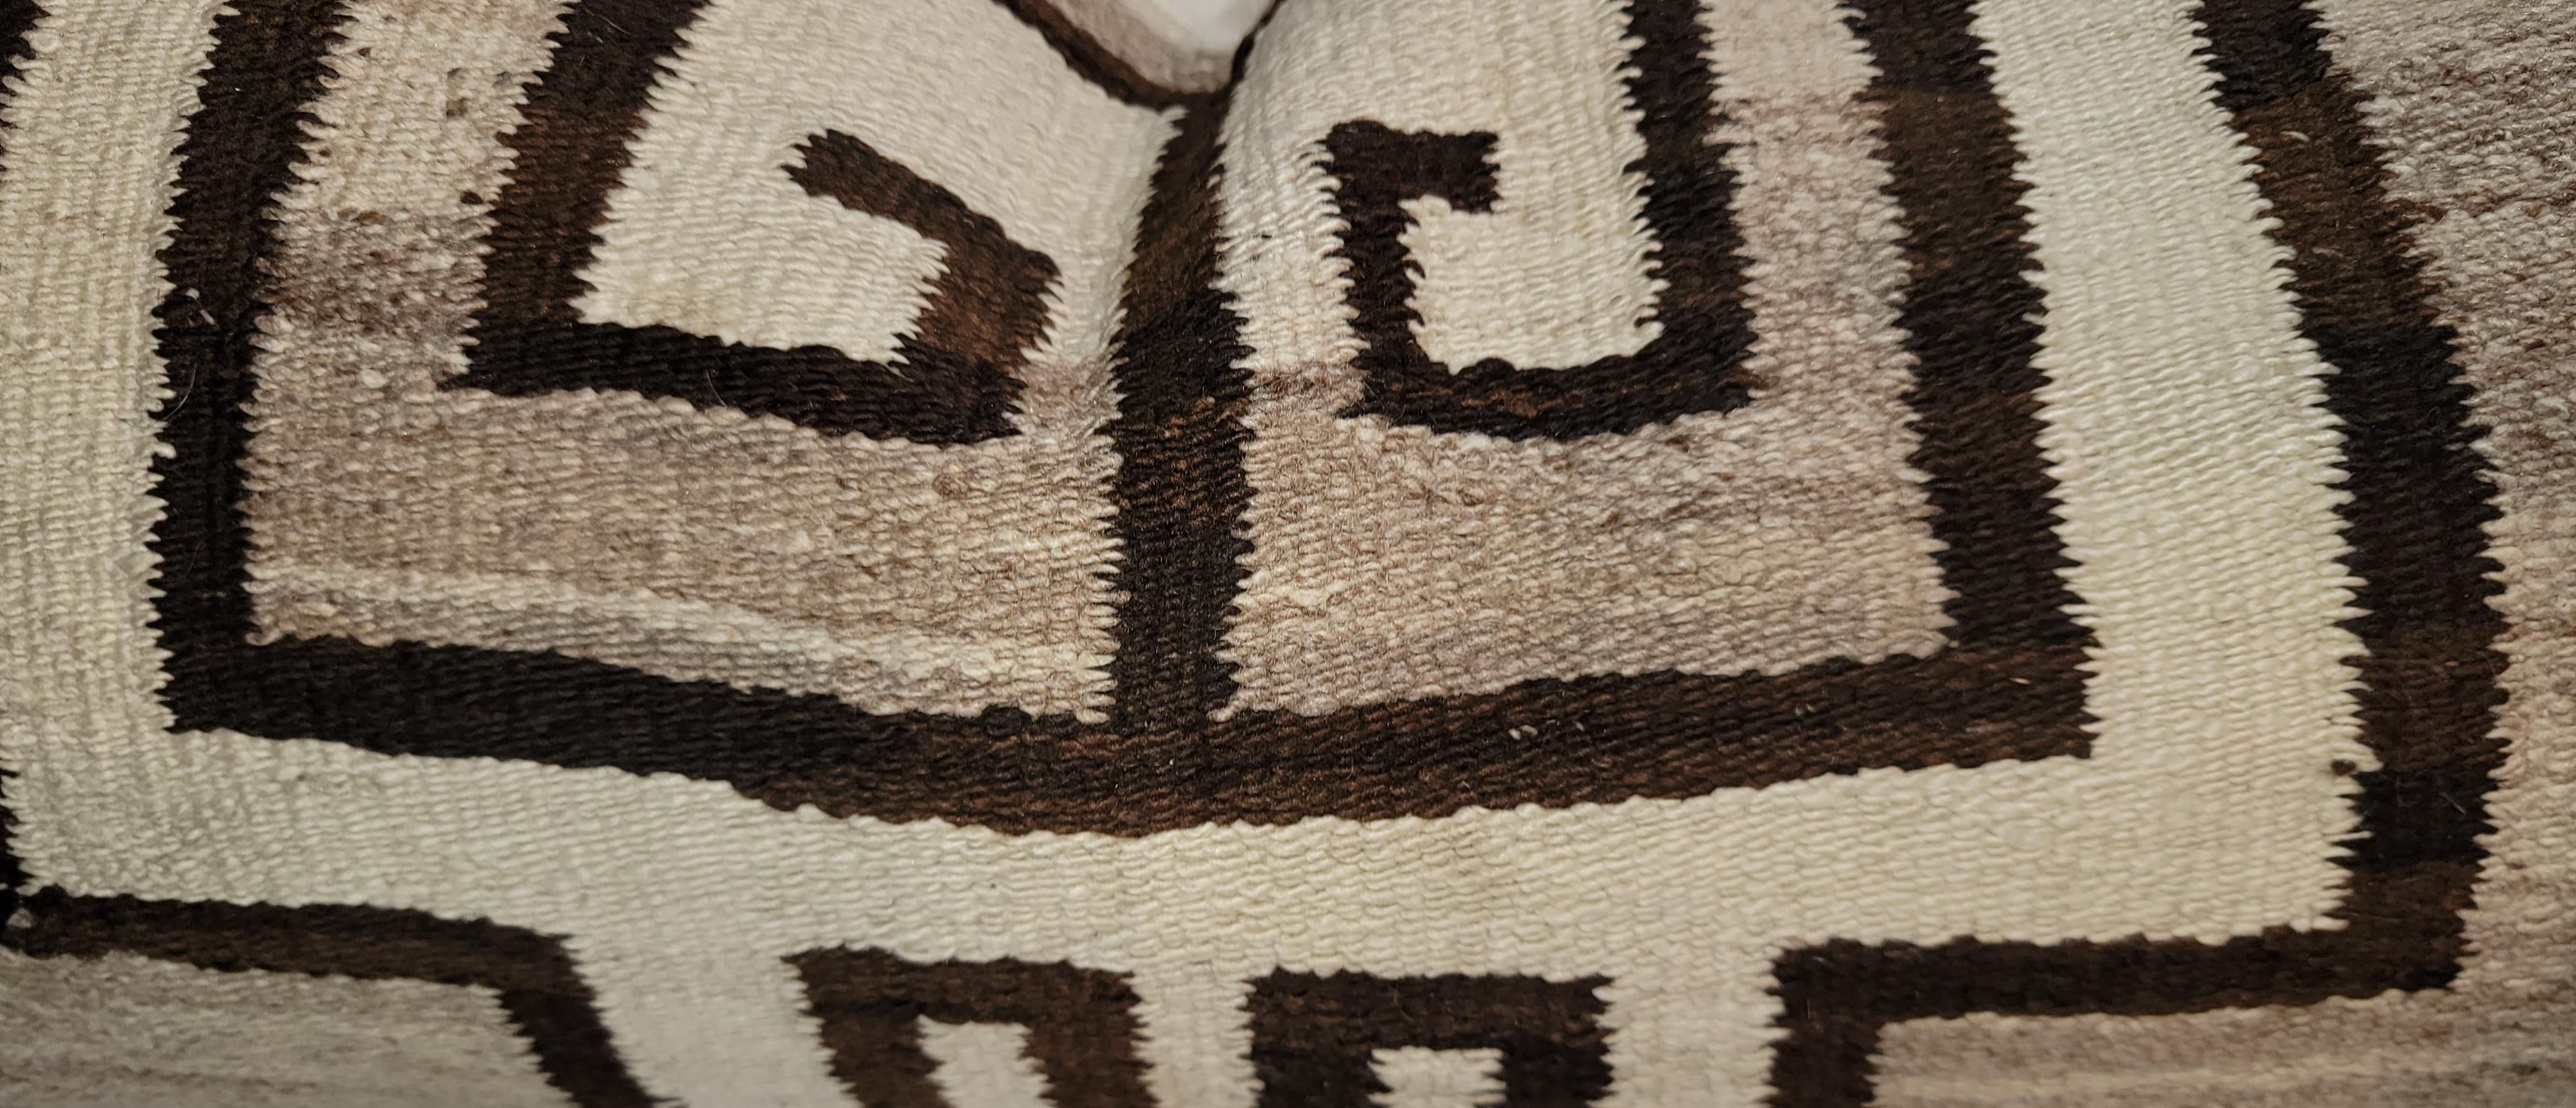 Navajo Geometric wool pillows with natural neutral colors. 
The wool on this patter is a tight knit wool with hand dyed dark browns. 
Linen backing and down and feather inserts.